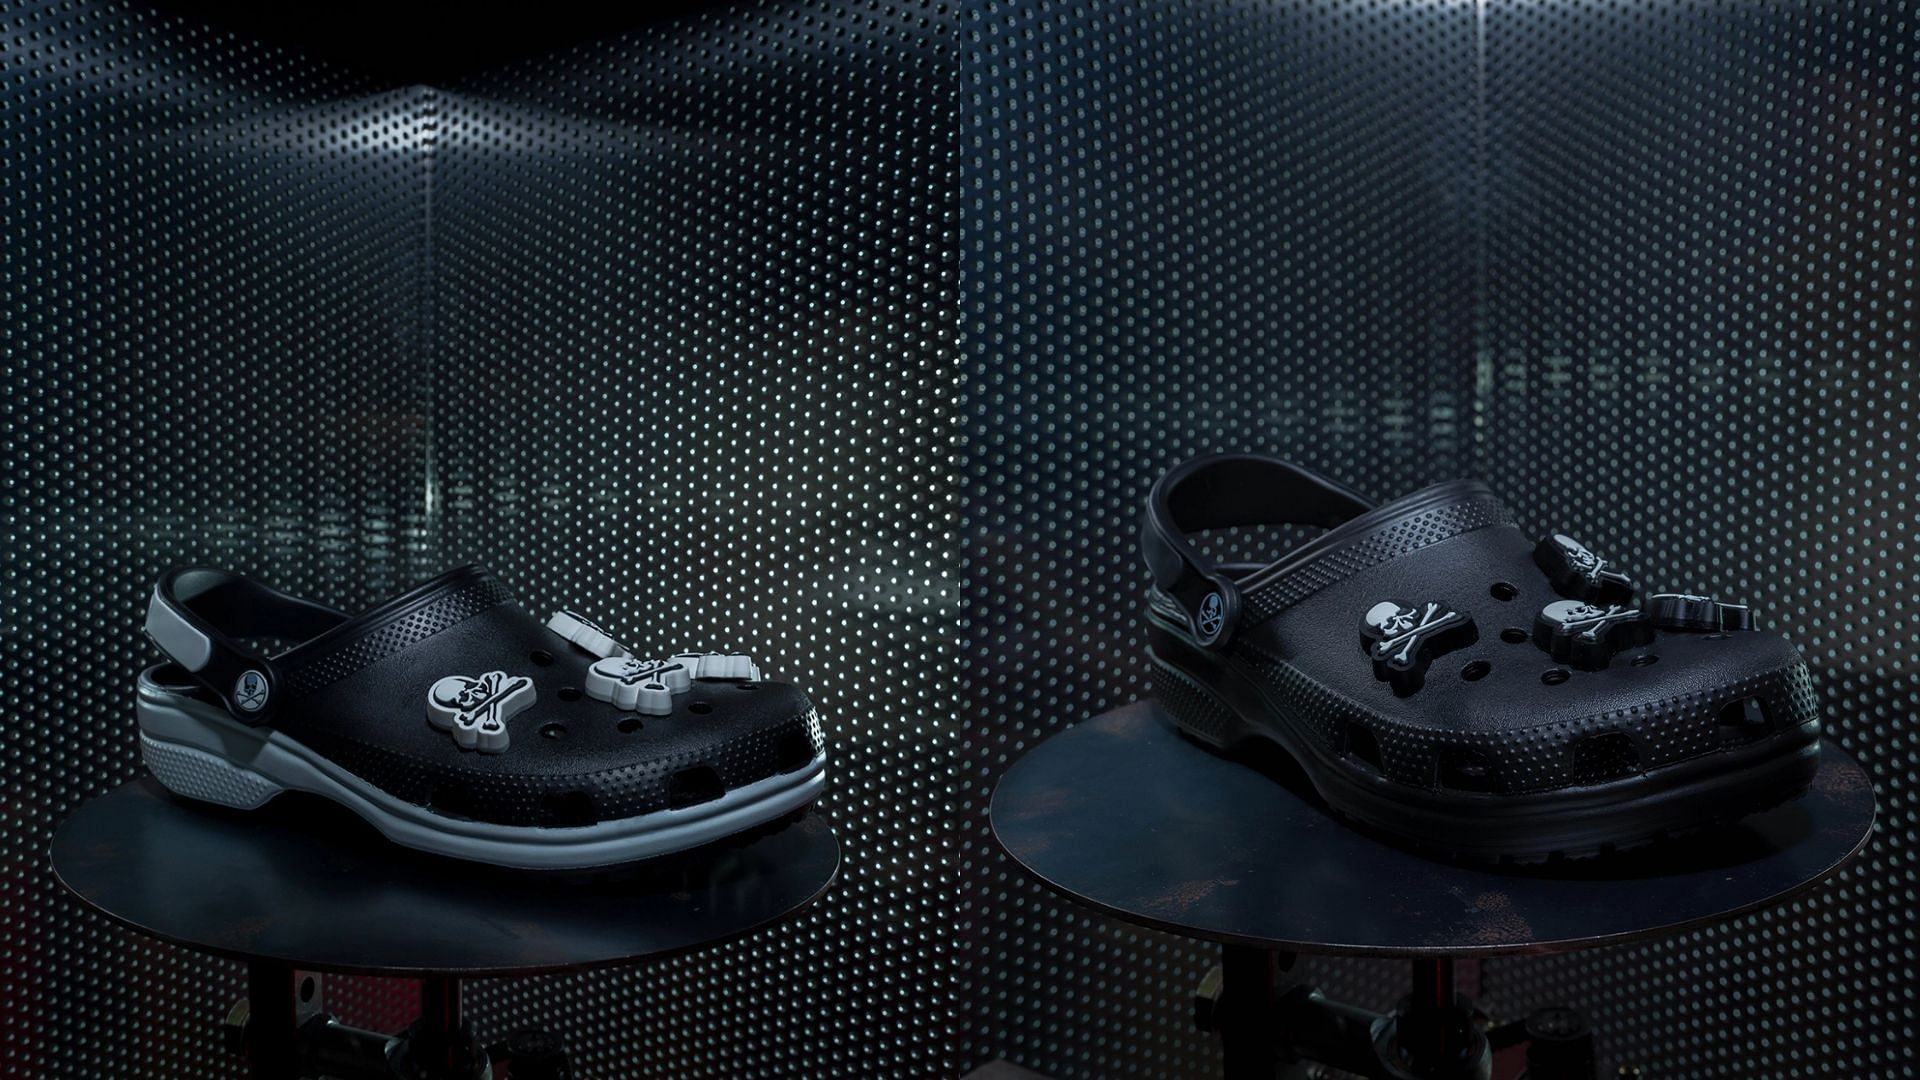 Where to buy the Mastermind Japan x Crocs footwear collection? Price,  release date, and more explored